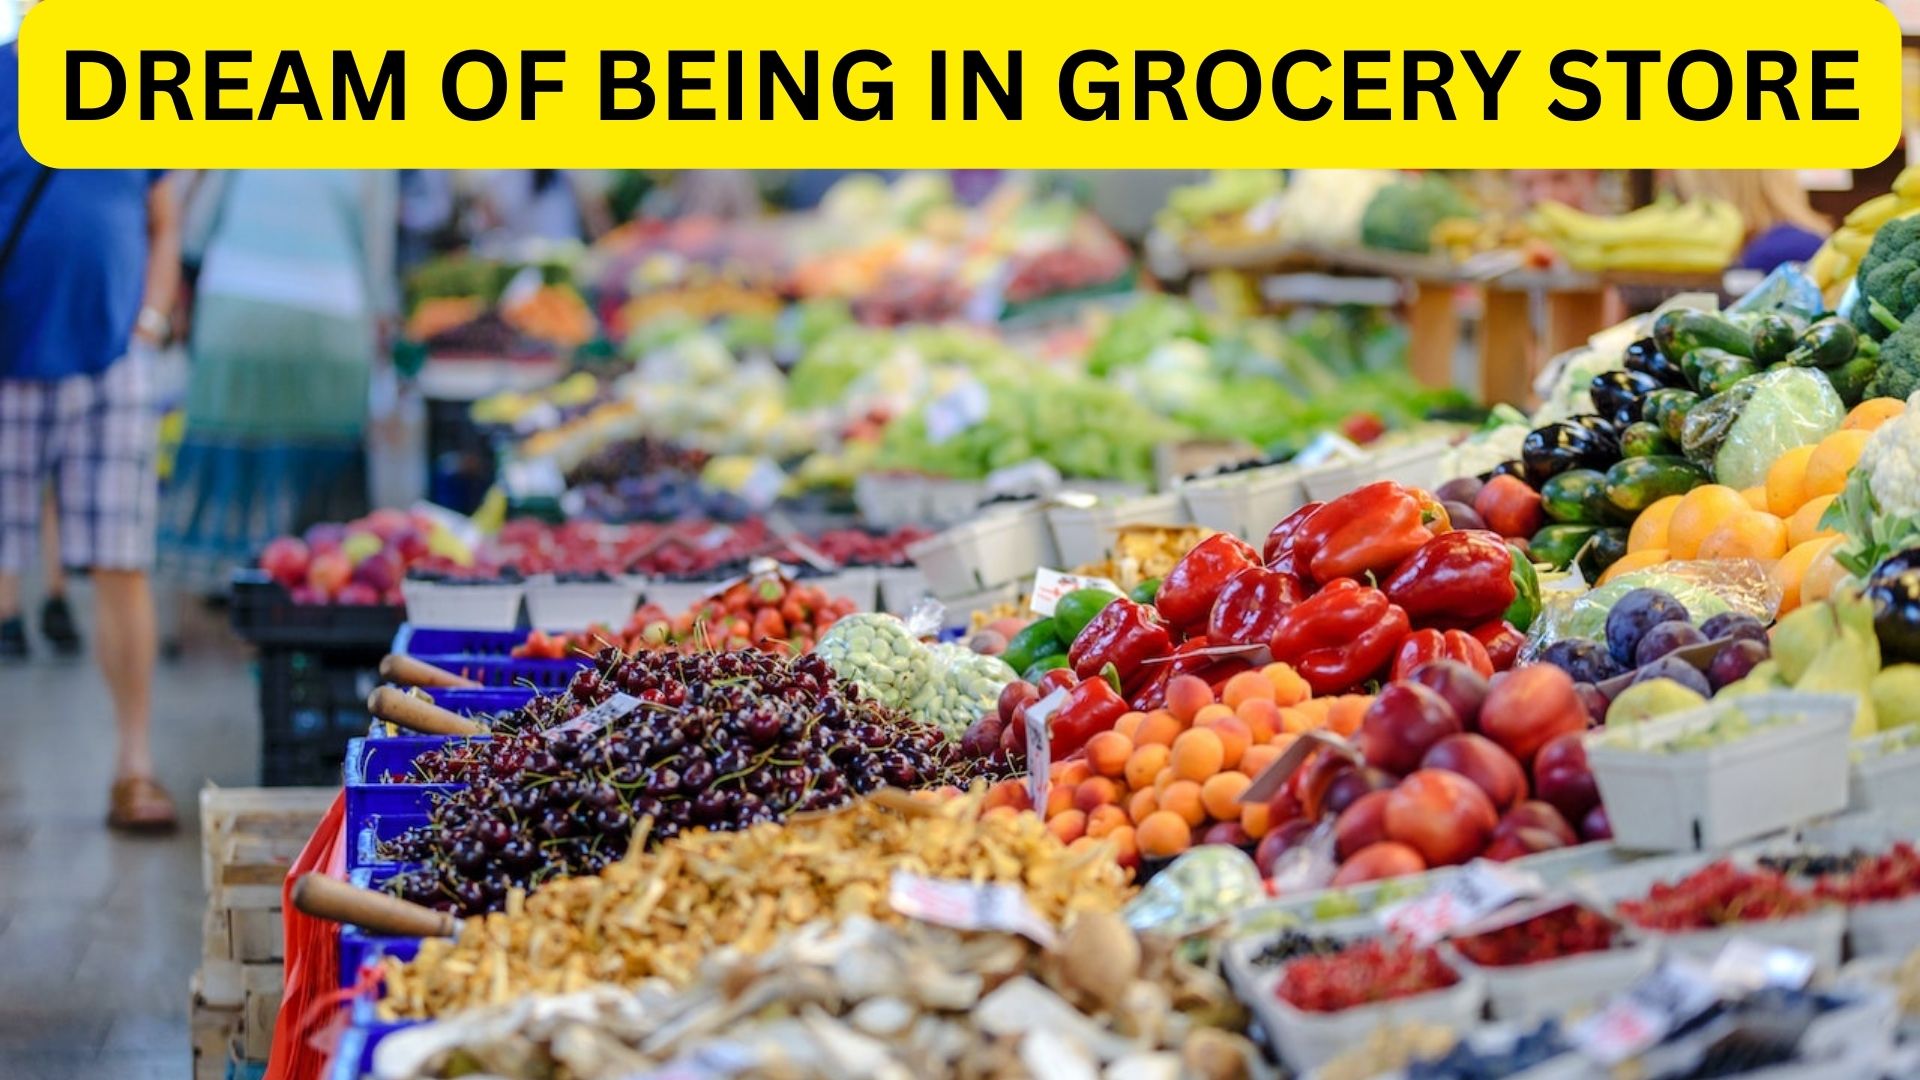 Dream Of Being In Grocery Store - Symbolizes Your Desire To Improve Your Skills